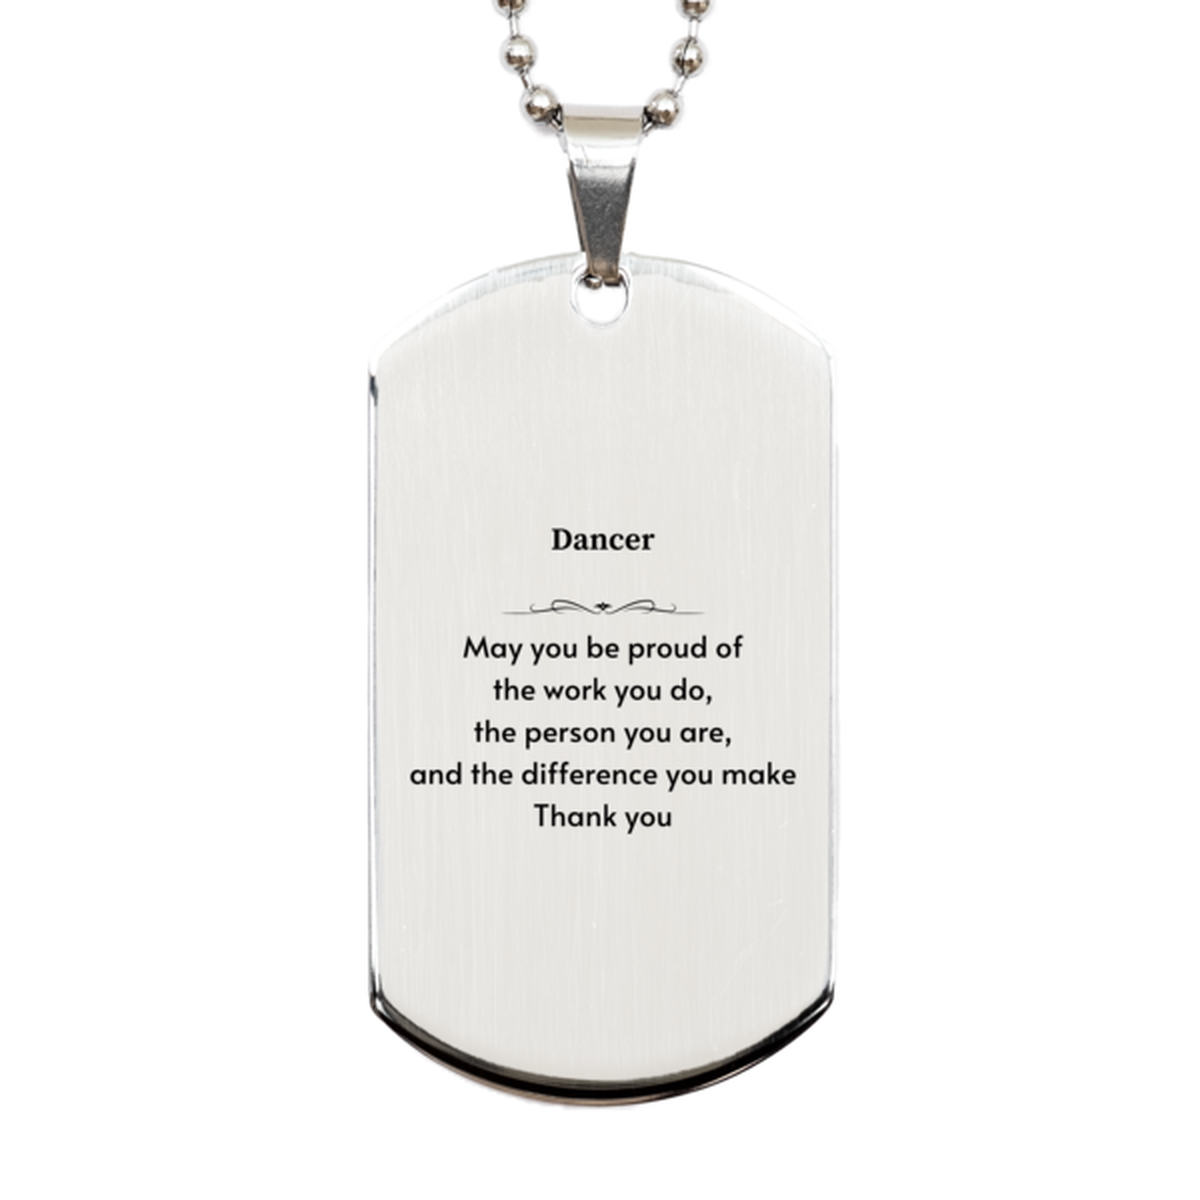 Heartwarming Silver Dog Tag Retirement Coworkers Gifts for Dancer, Dancer May You be proud of the work you do, the person you are Gifts for Boss Men Women Friends